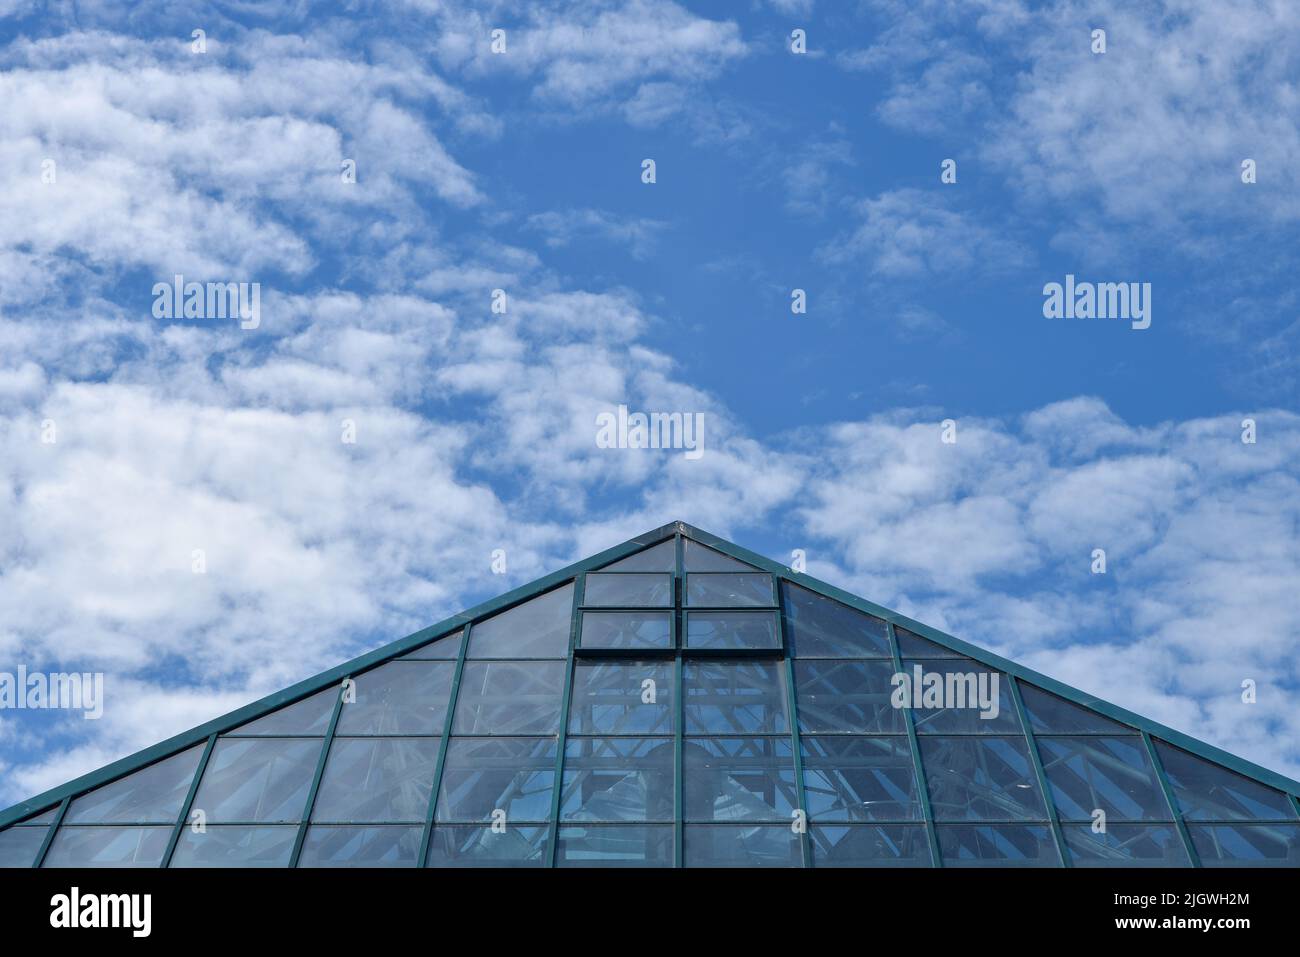 Abstract view of a modern buildings pointed roof leading to a blue sky with fluffy clouds. Stock Photo